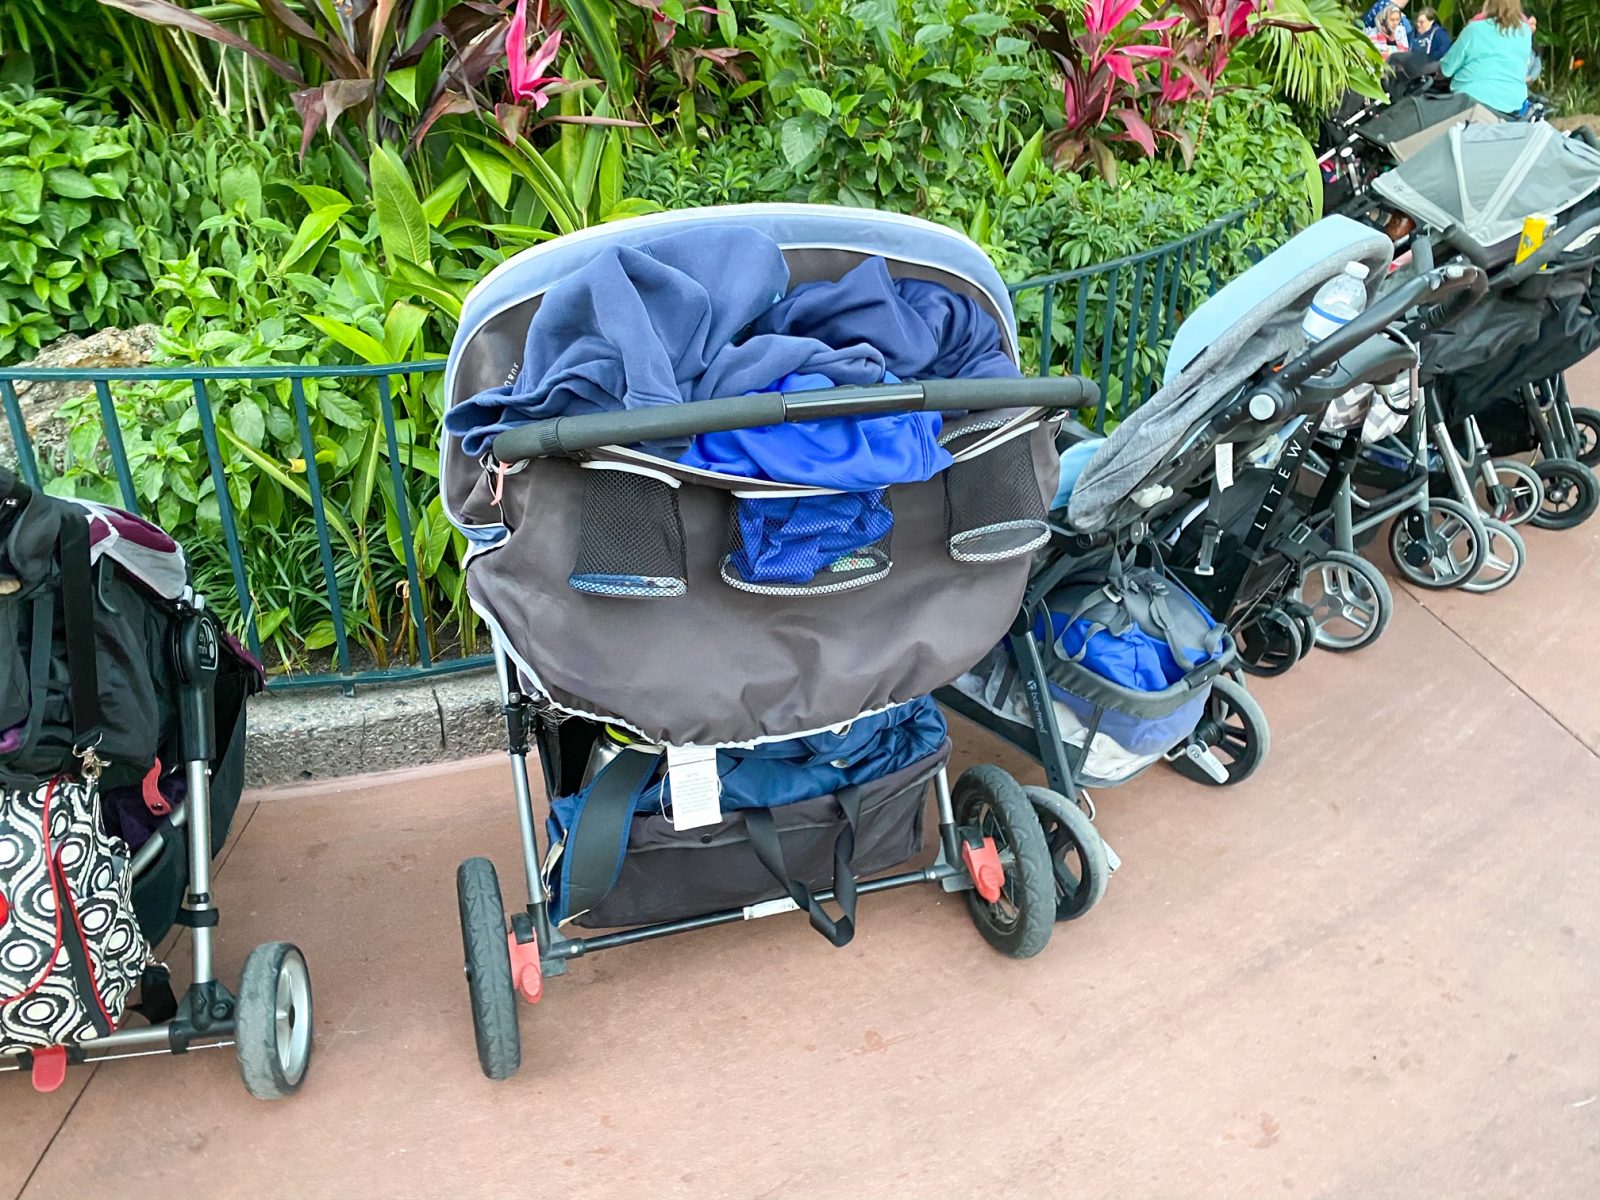 Once again, when leaving your strollers at Disney when on an attraction, they can be moved to spots like this to help avoid traffic. 